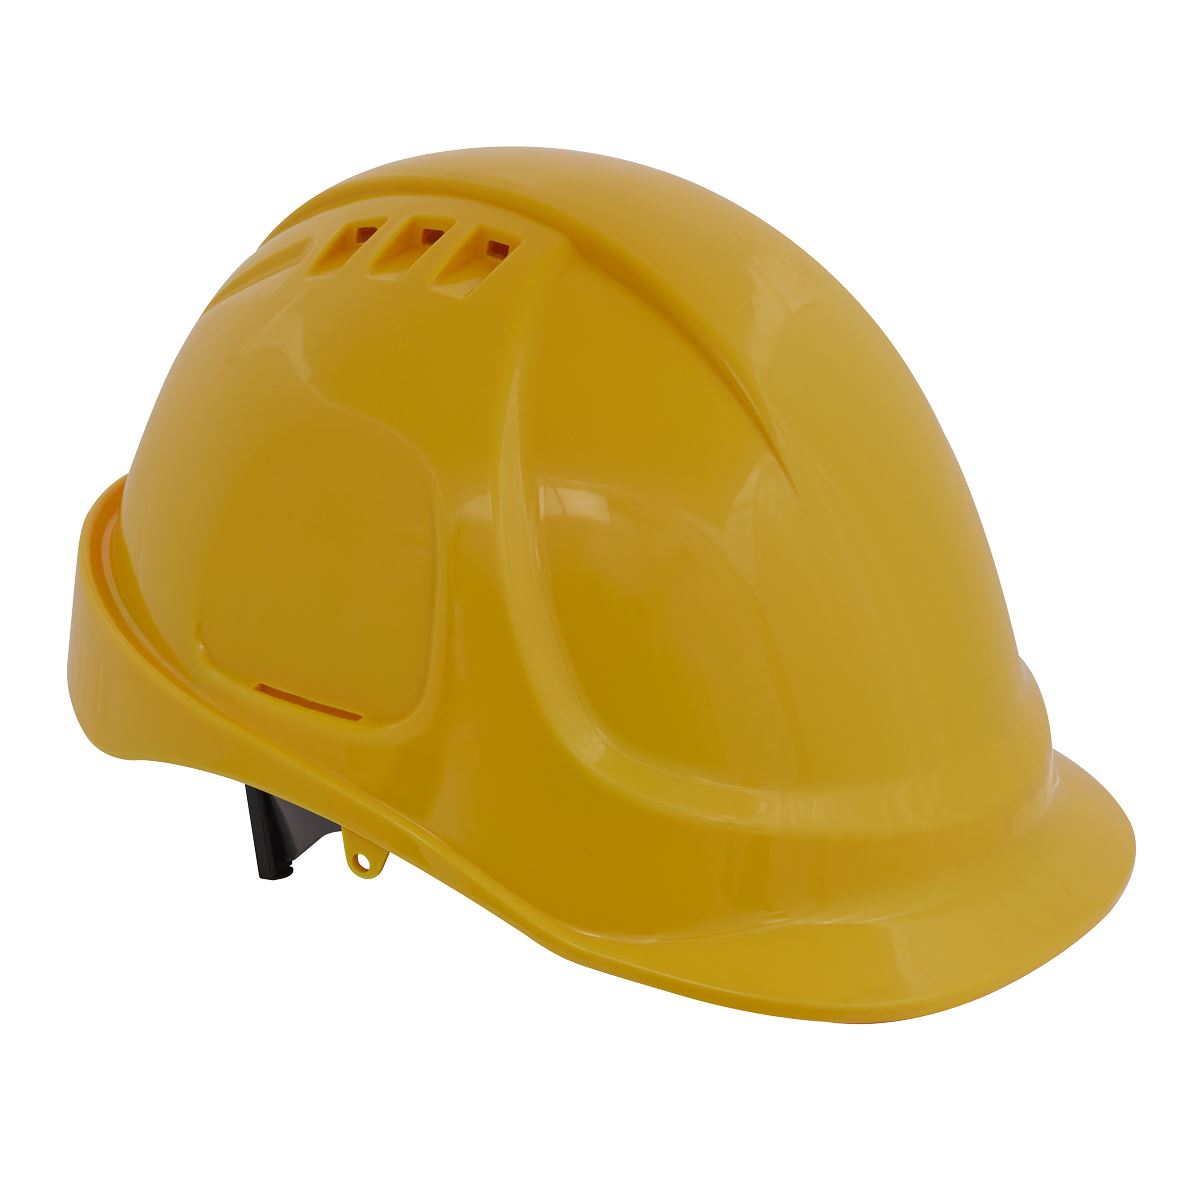 Worksafe by Sealey Safety Helmet - Vented (Yellow)